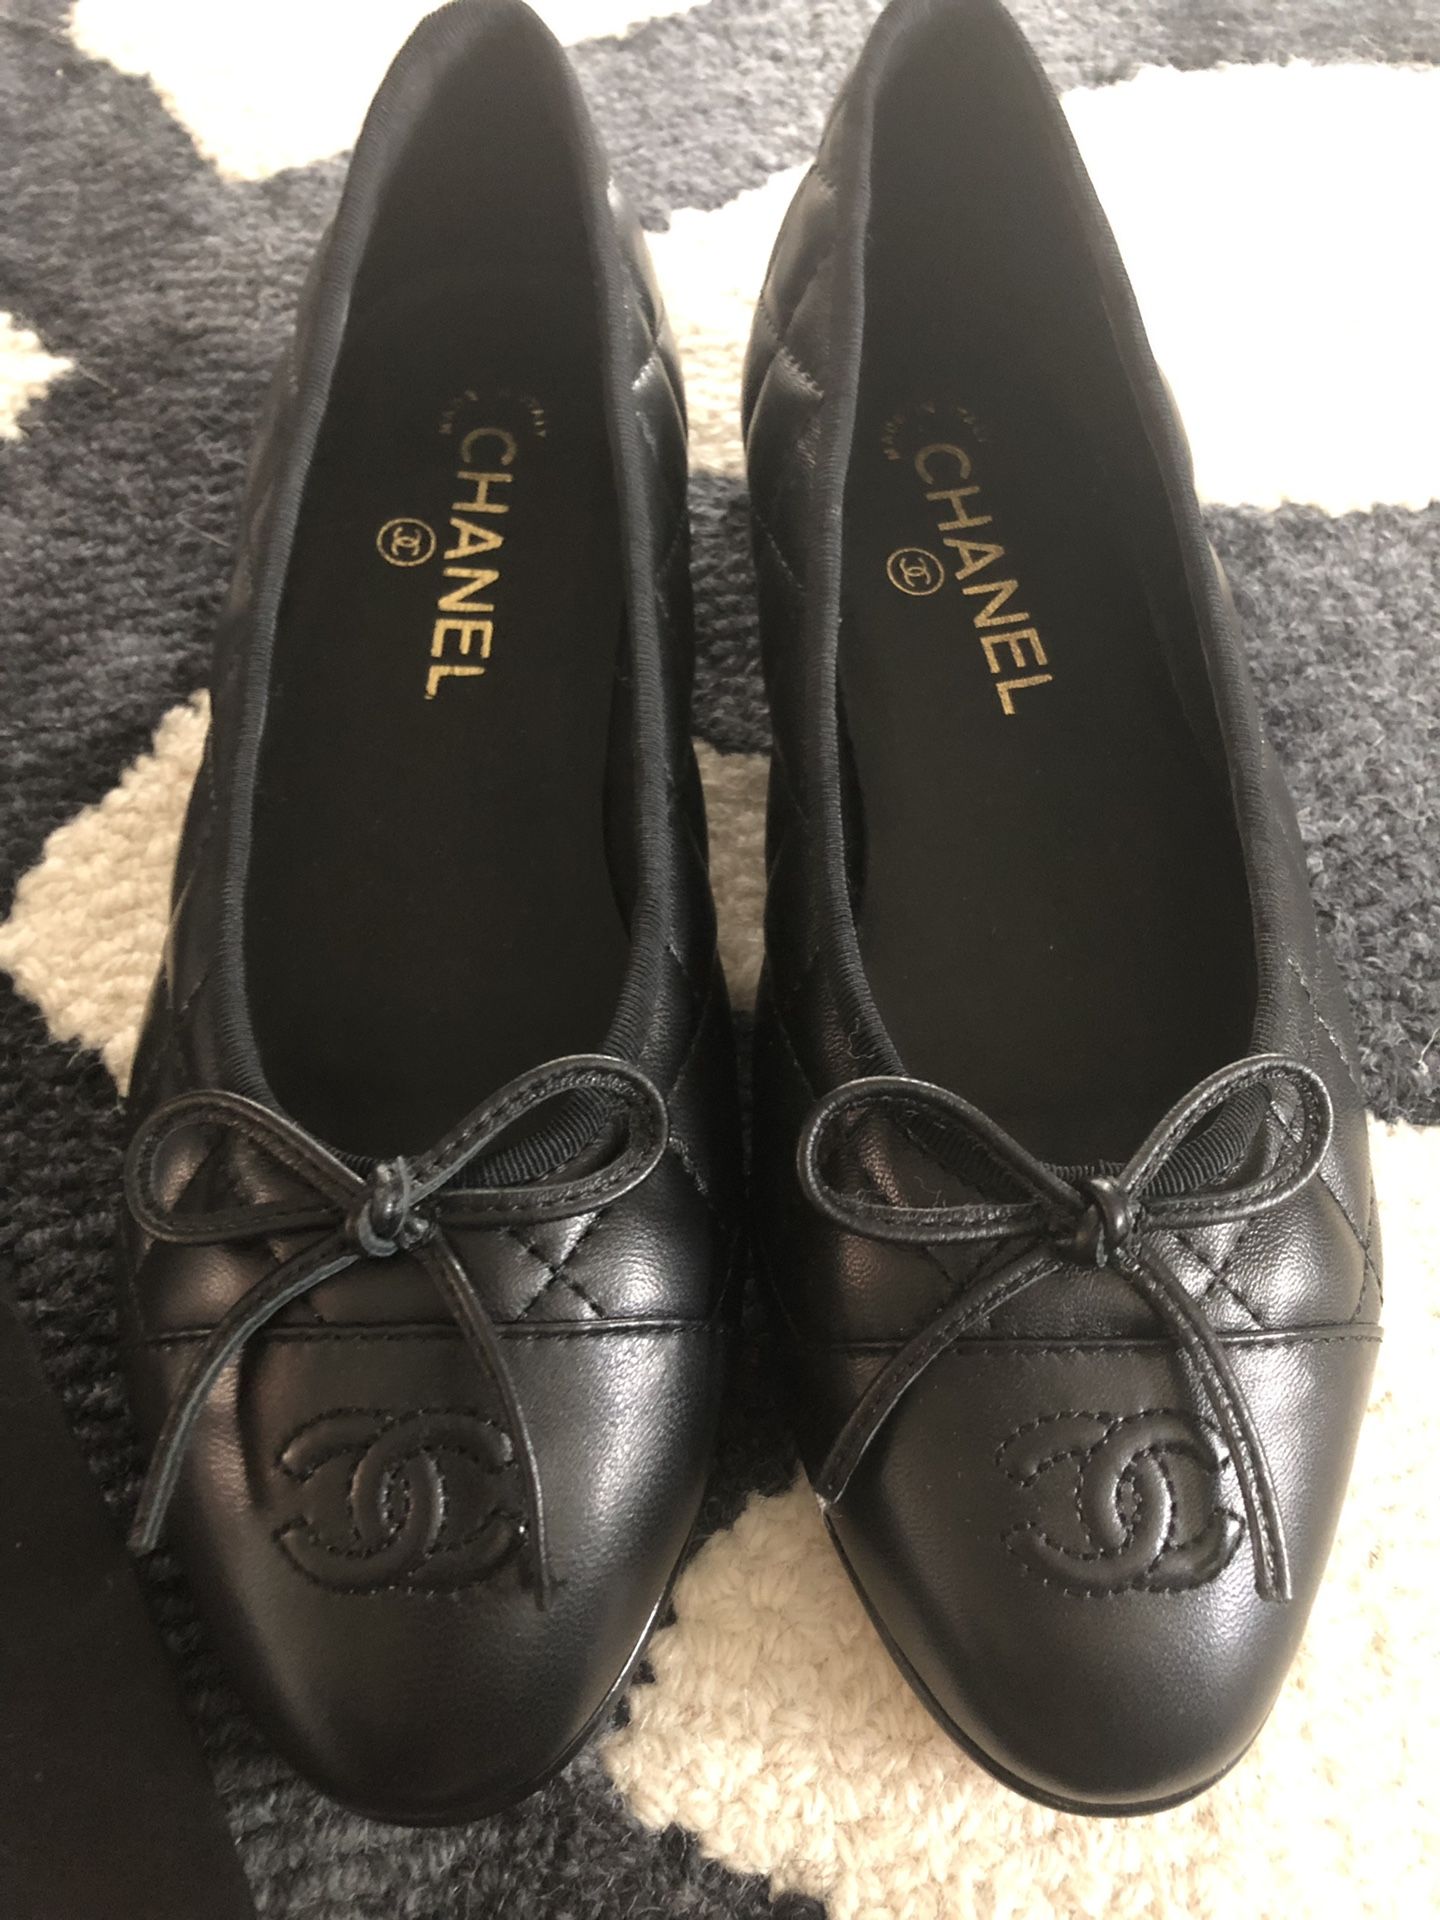 Chanel quilted leather ballet flats 37 size 7